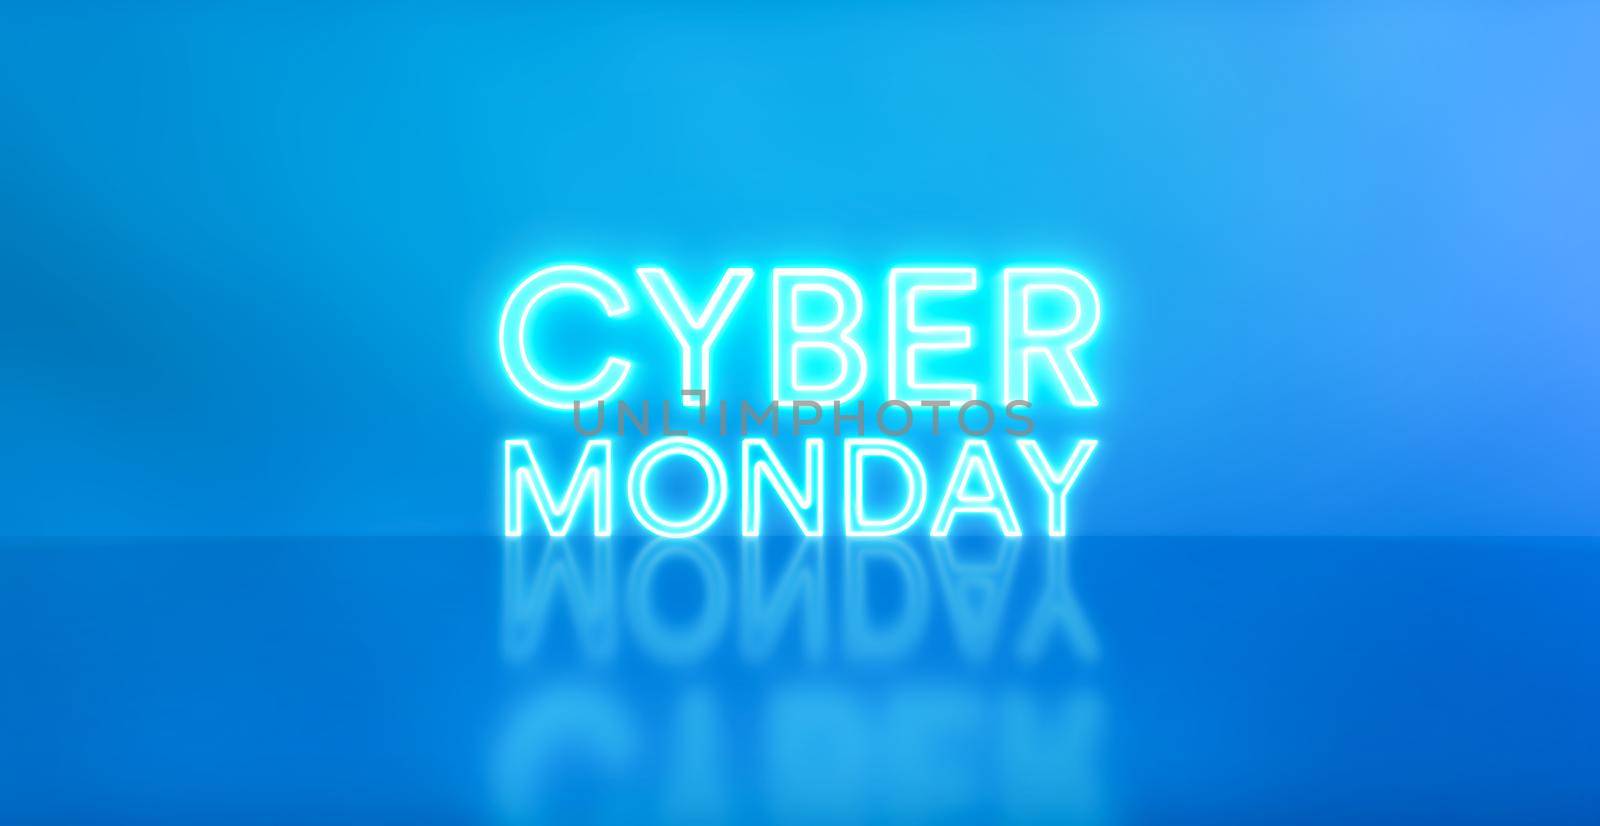 Cyber monday neon sign on blue studio background. Glowing white and blue neon text for advertising and promotion. Sale shopping concept. Icon neon light banner. 3d rendering - illustration.